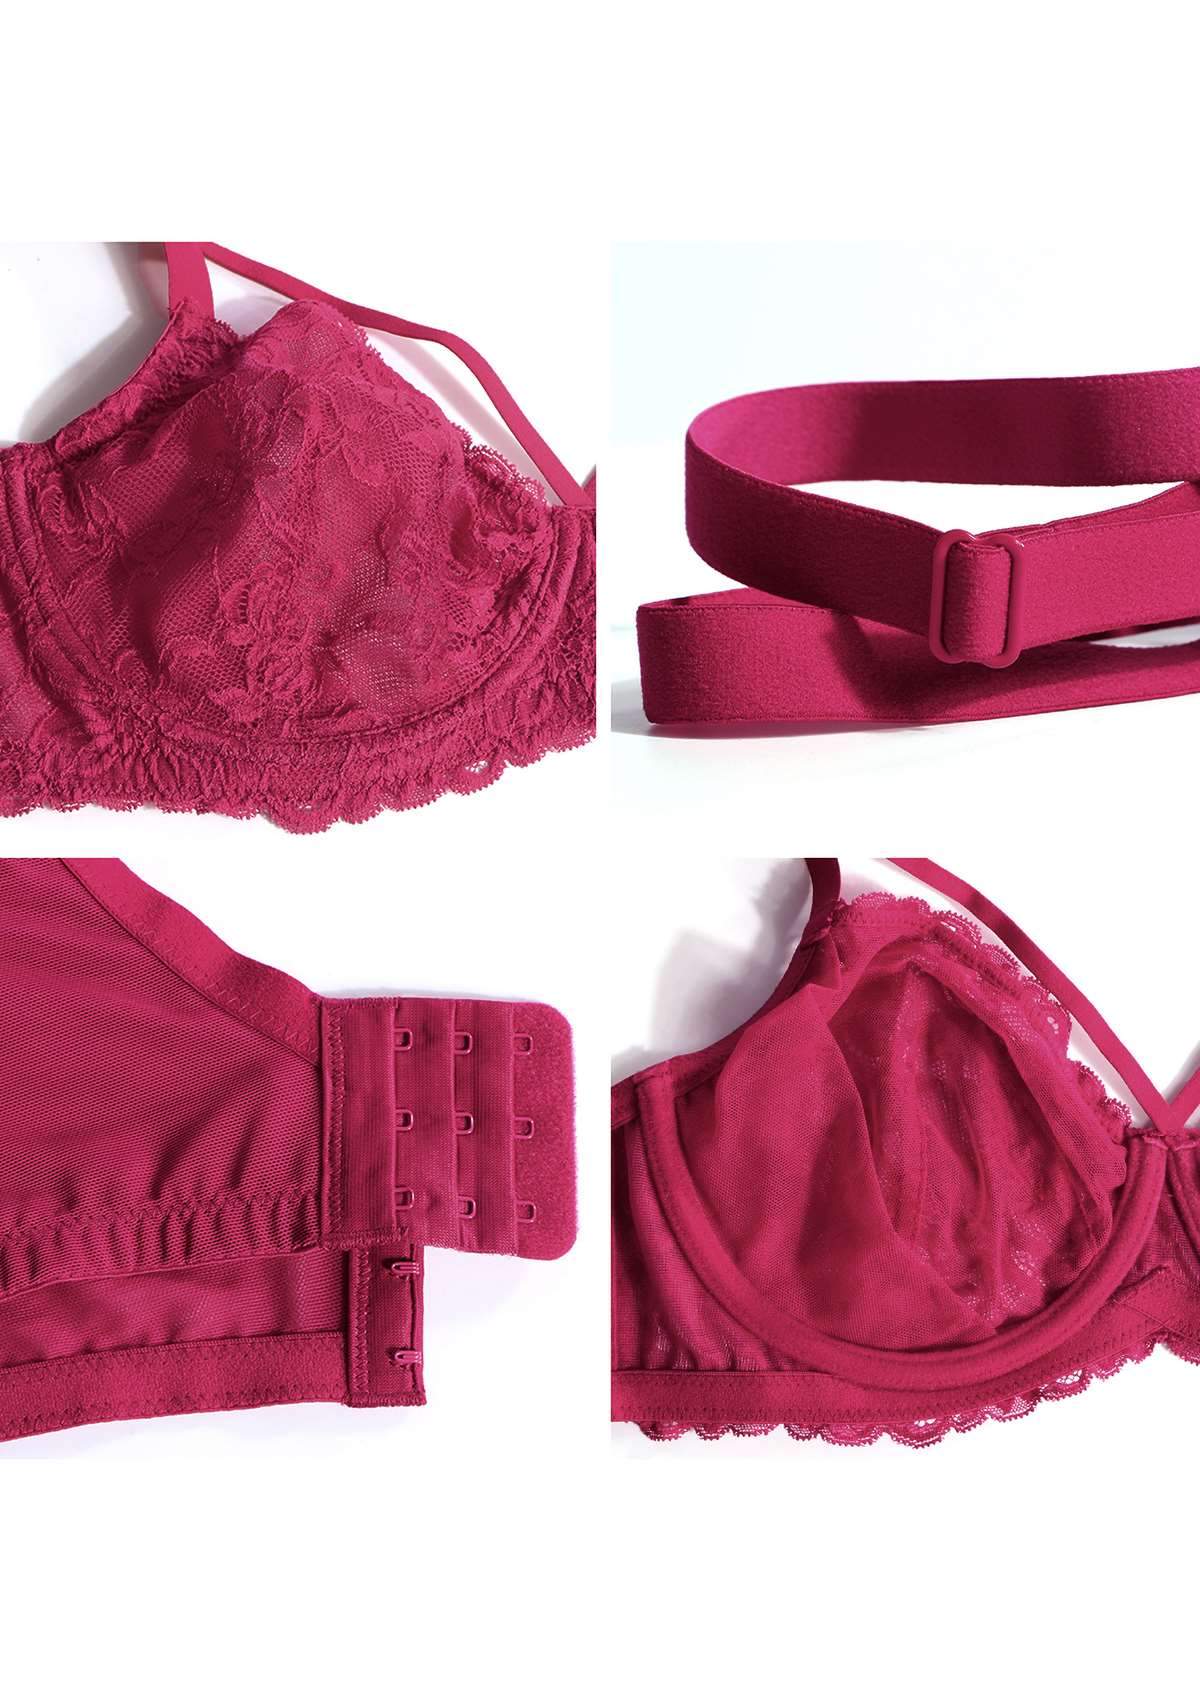 HSIA Pretty In Petals Sexy Lace Bra: Full Coverage Back Smoothing Bra - Red / 44 / H